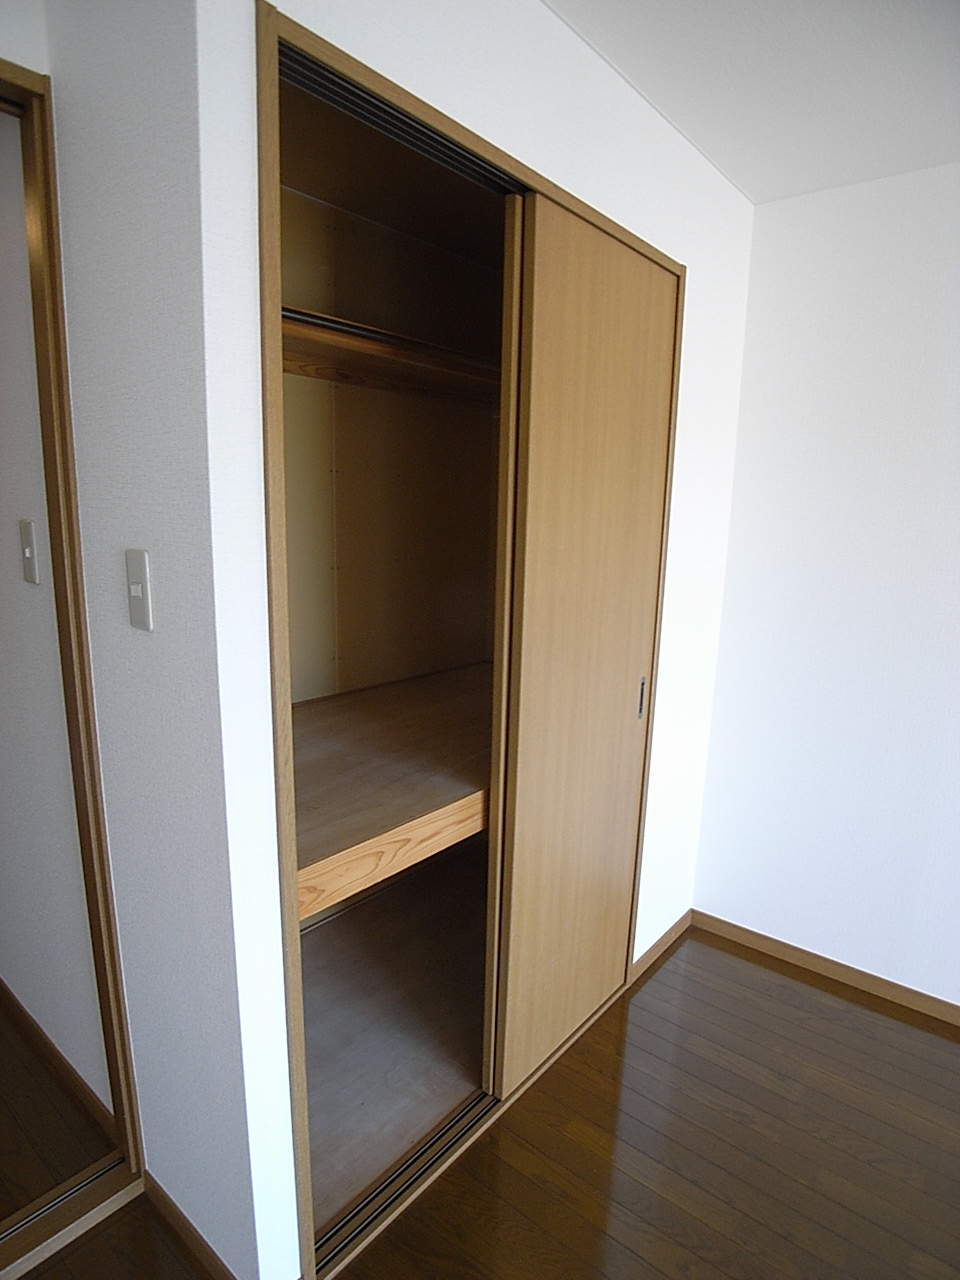 Other. It is amazing storage capacity Together with the entrance of the housing